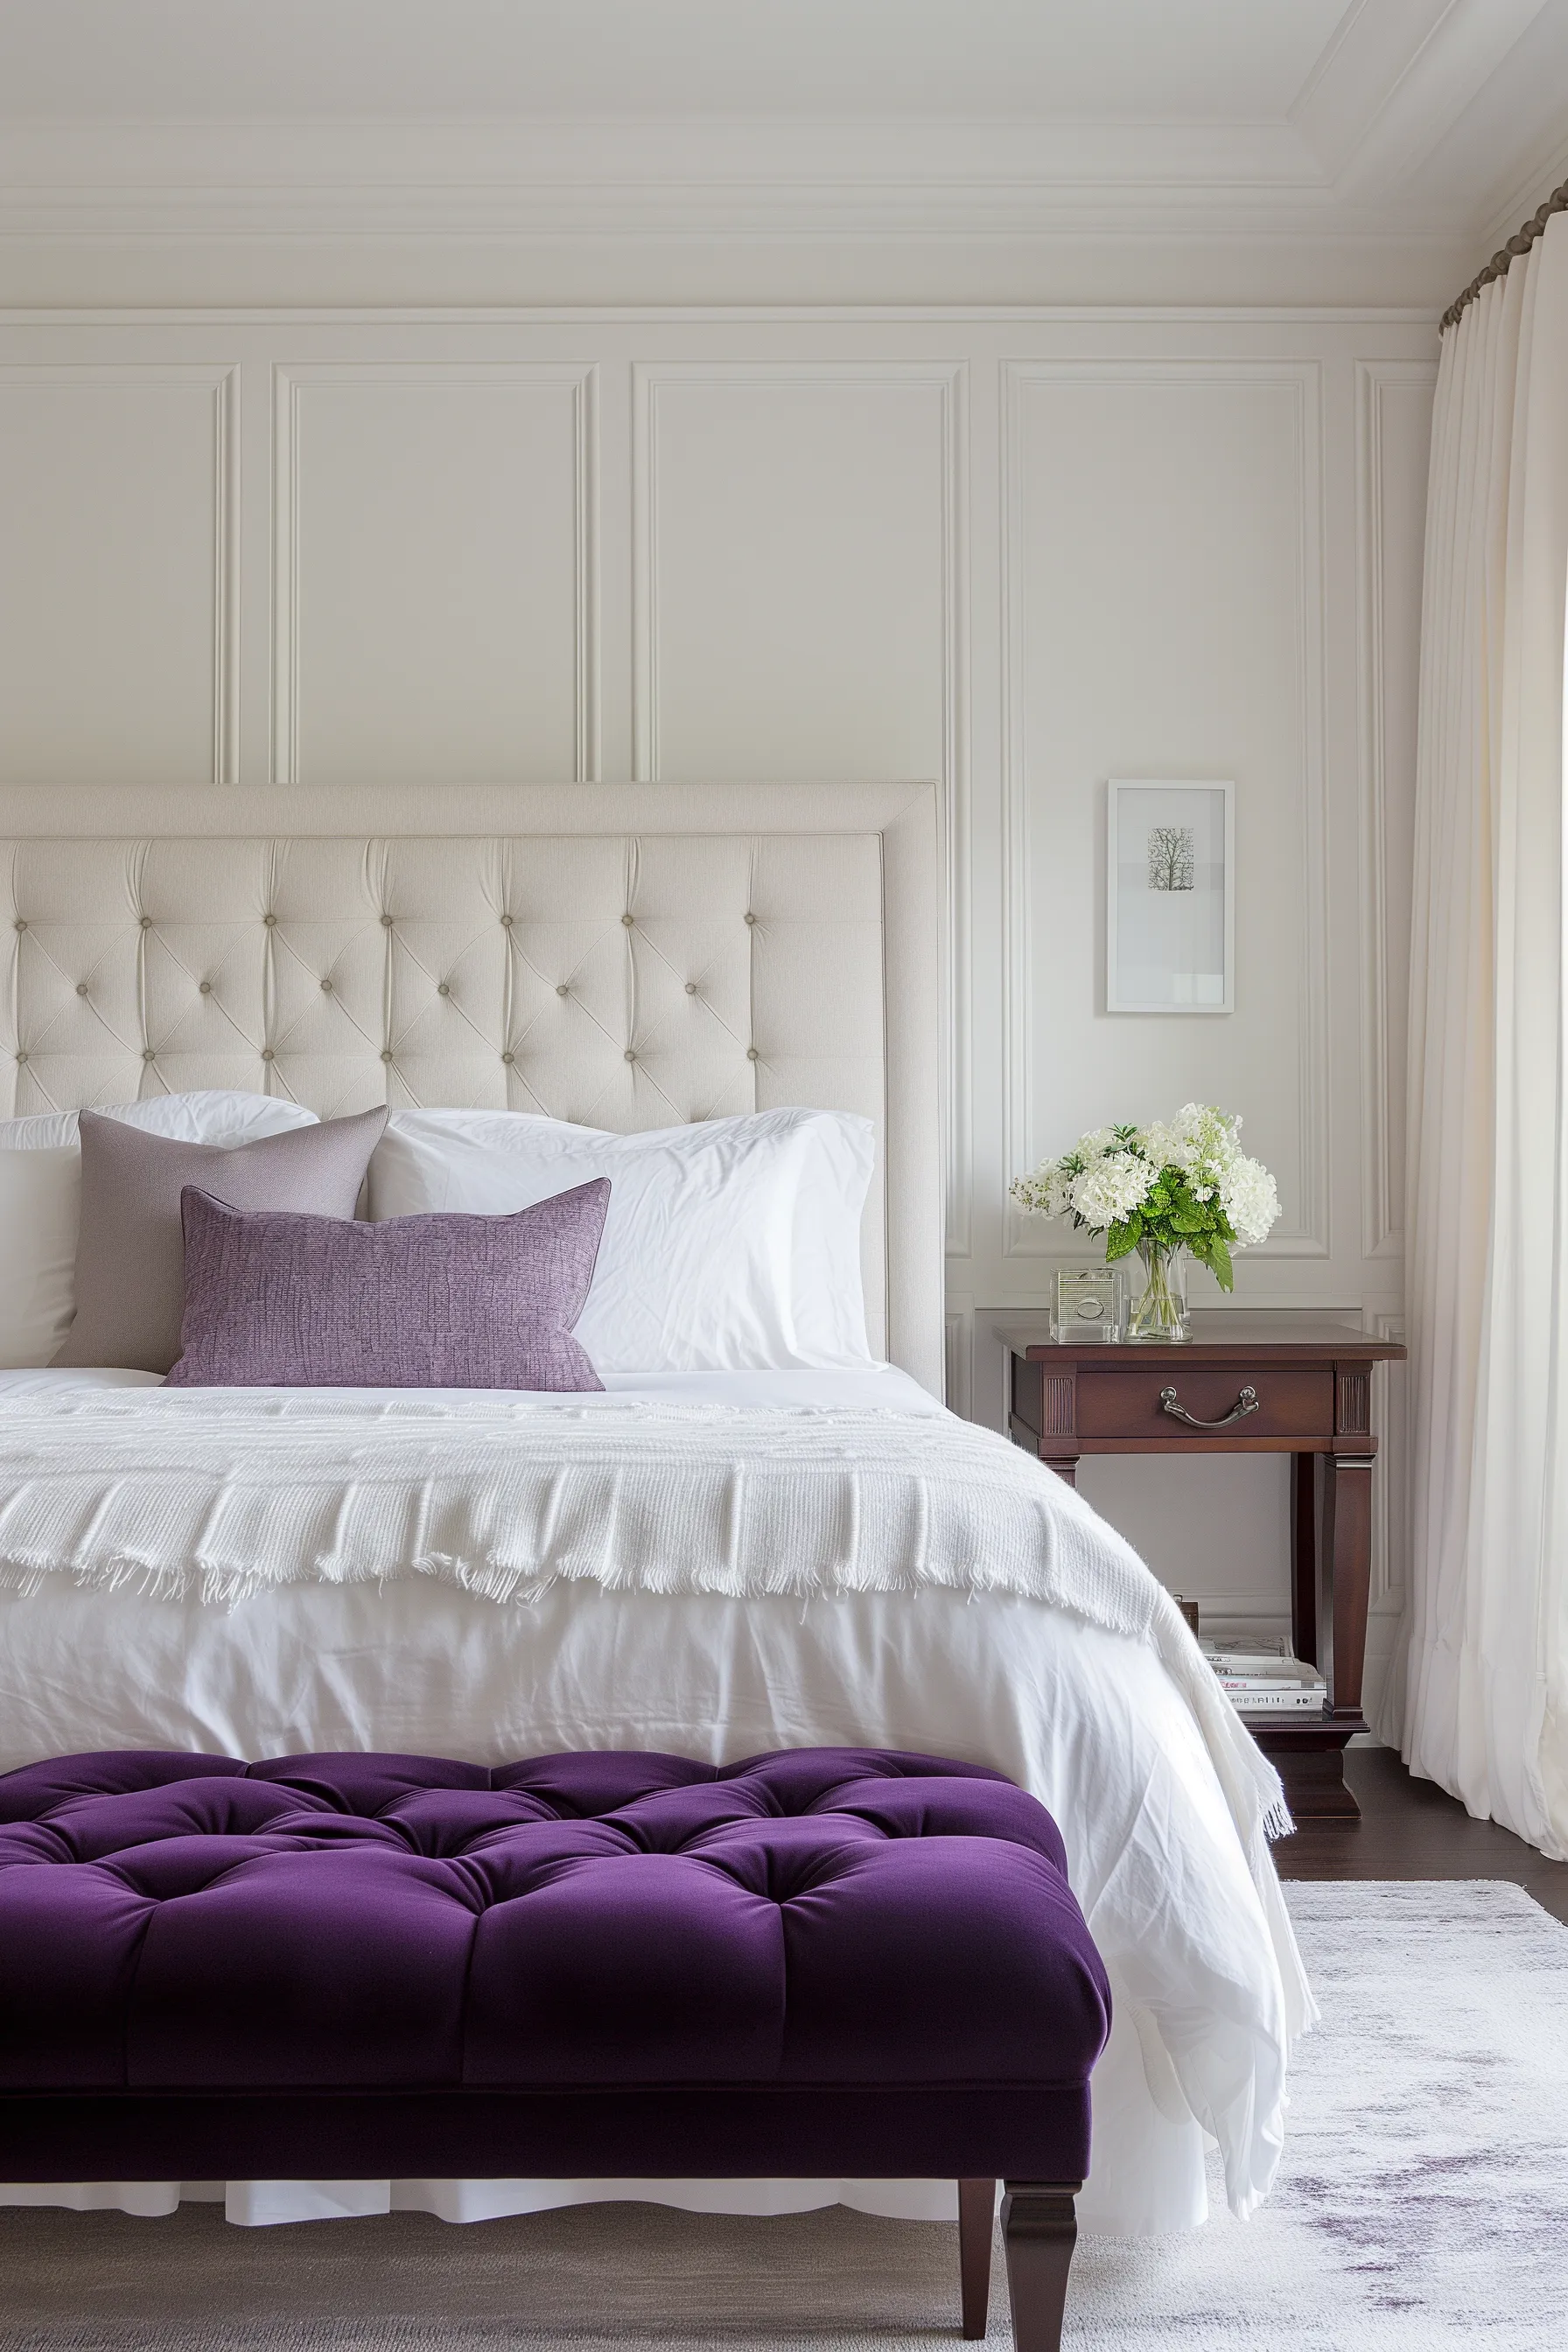 A white and purple bedroom with a purple bench